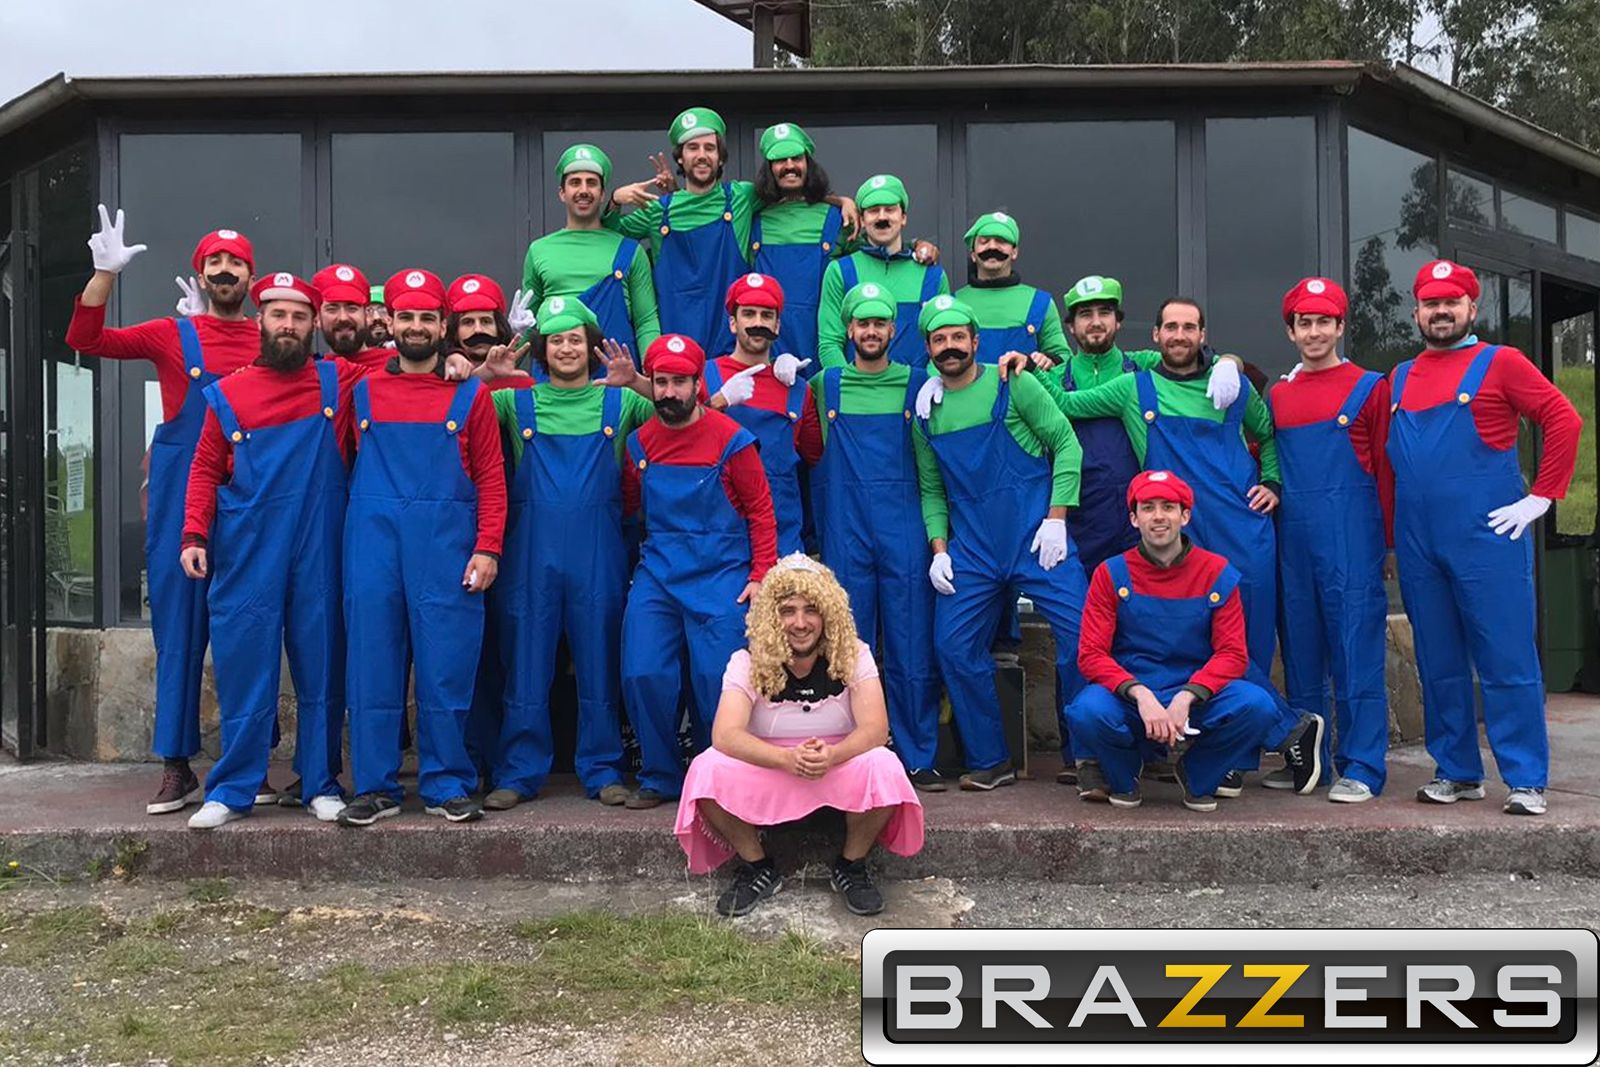 - I was told that adding the Brazzers logo to this pic with my friends would improve it